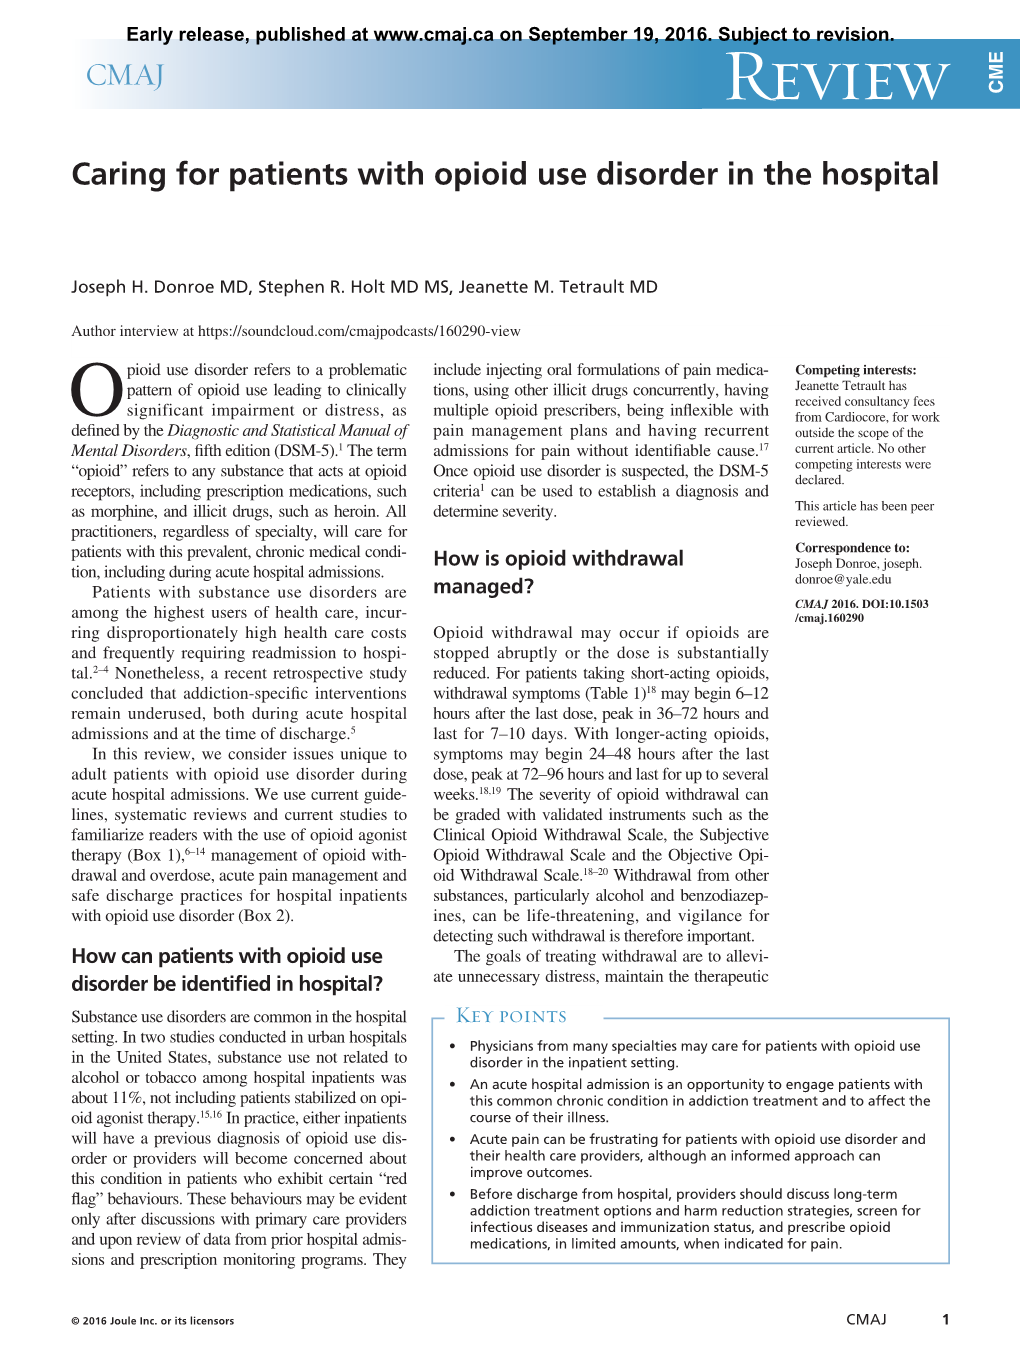 Caring for Patients with Opioid Use Disorder in the Hospital